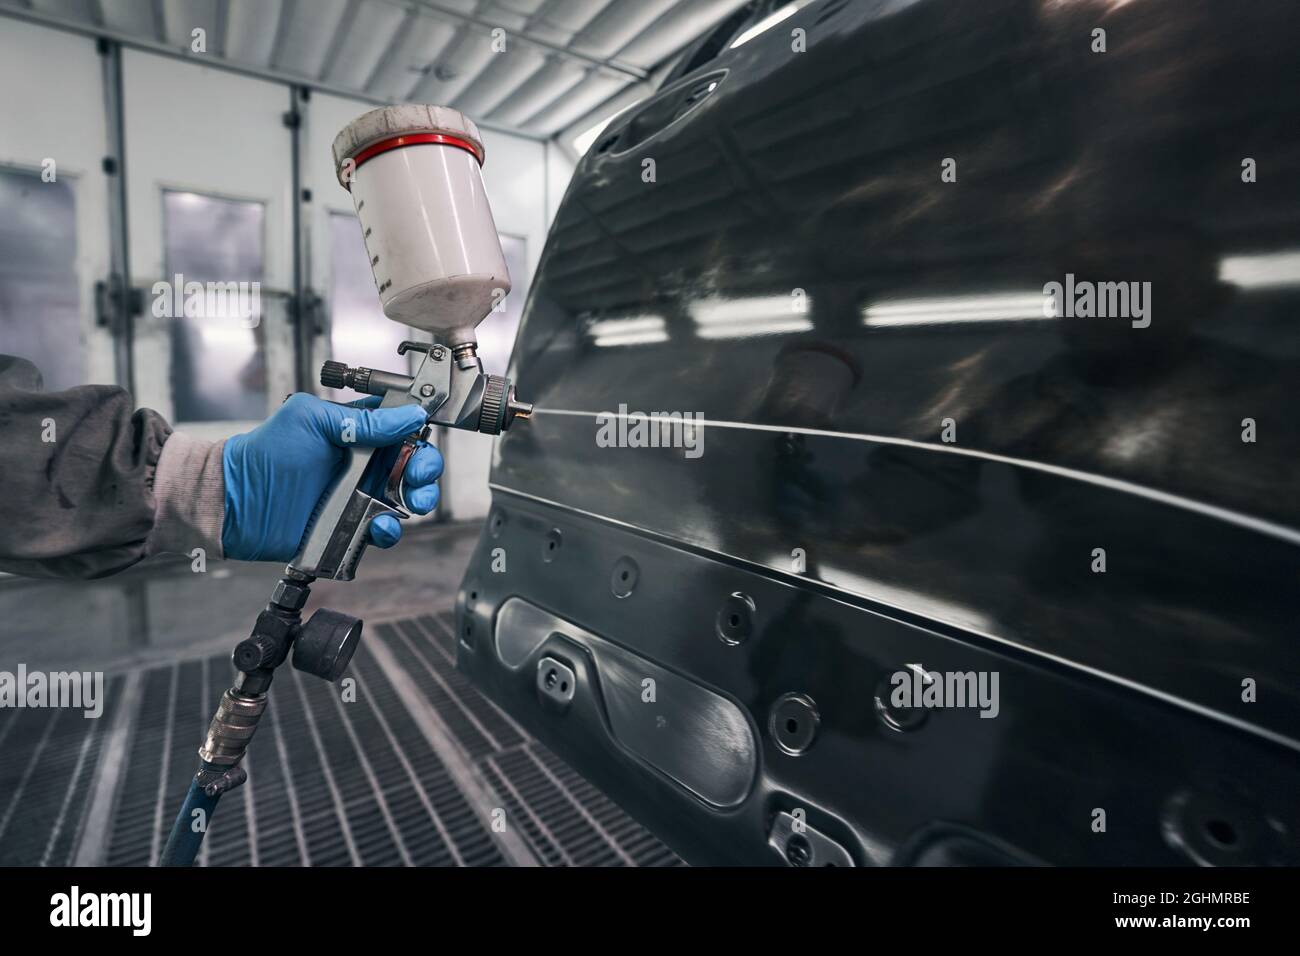 Male activating paint-spraying pistol while working on car Stock Photo